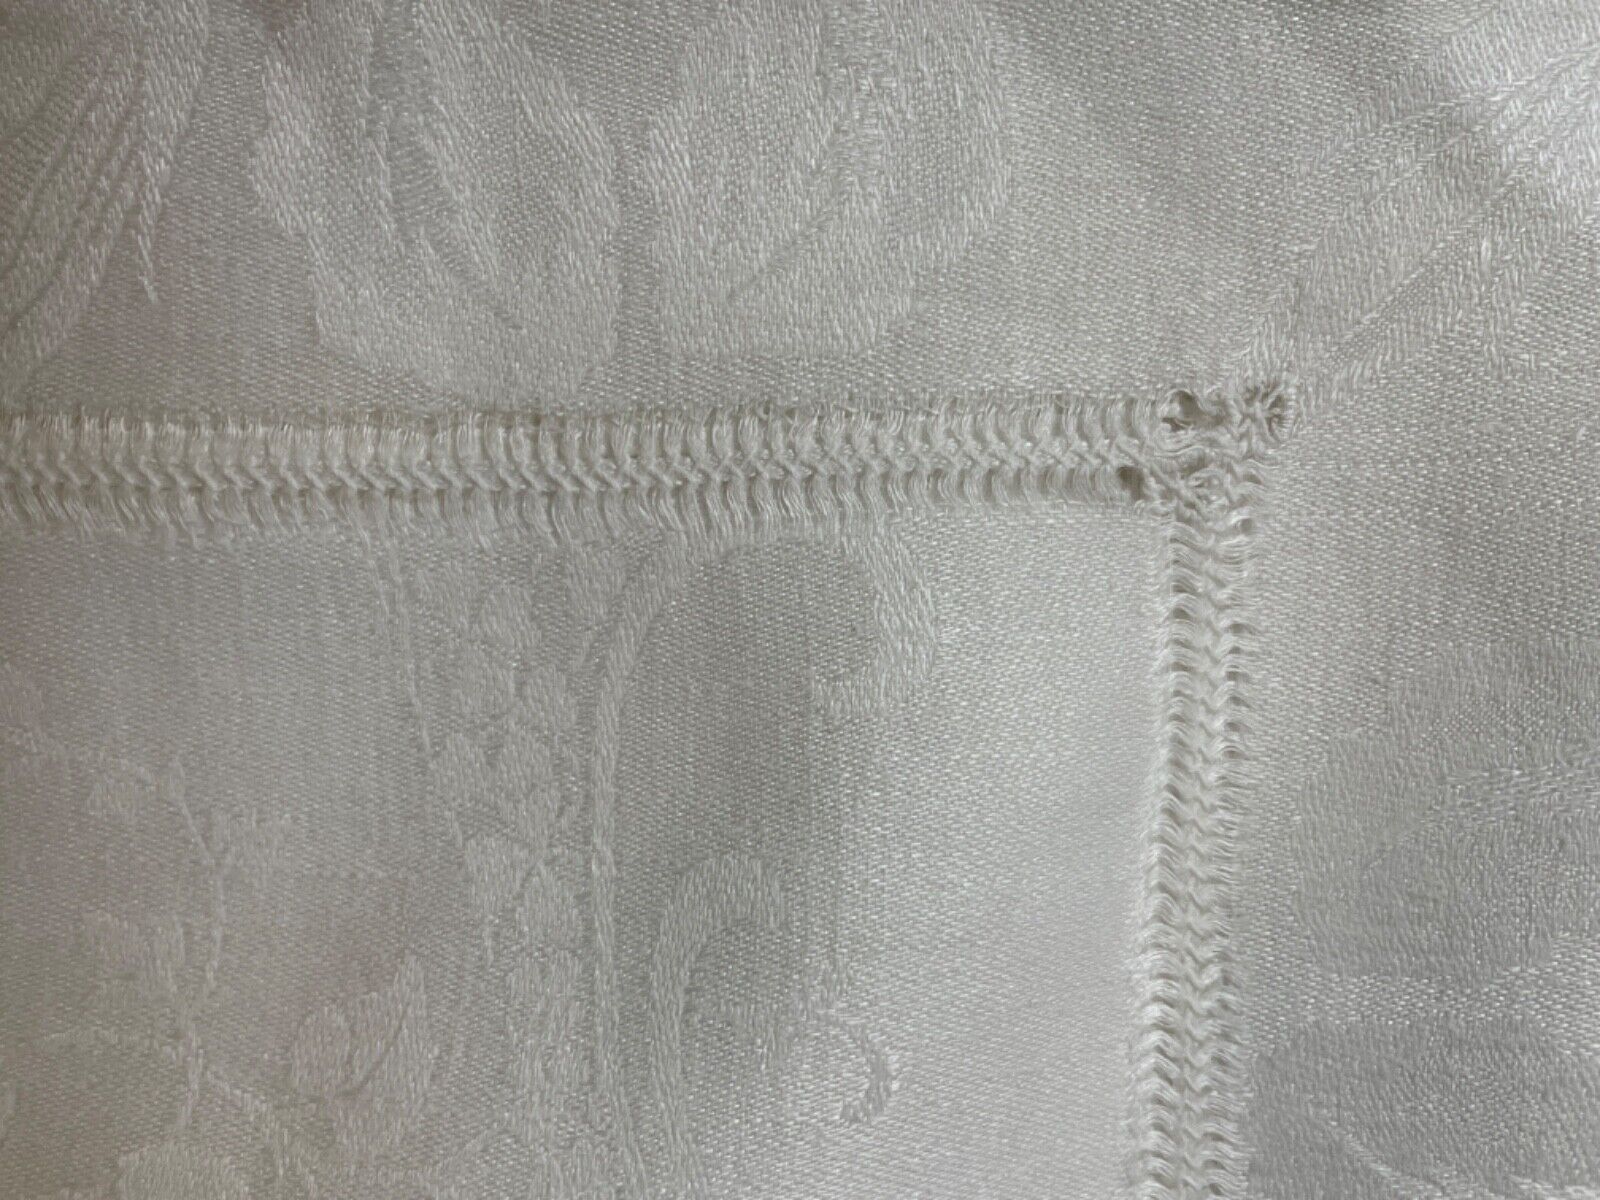 VTG Tablecloth White 65 x 78 Rectangle Damask Intricate Edging Beautiful